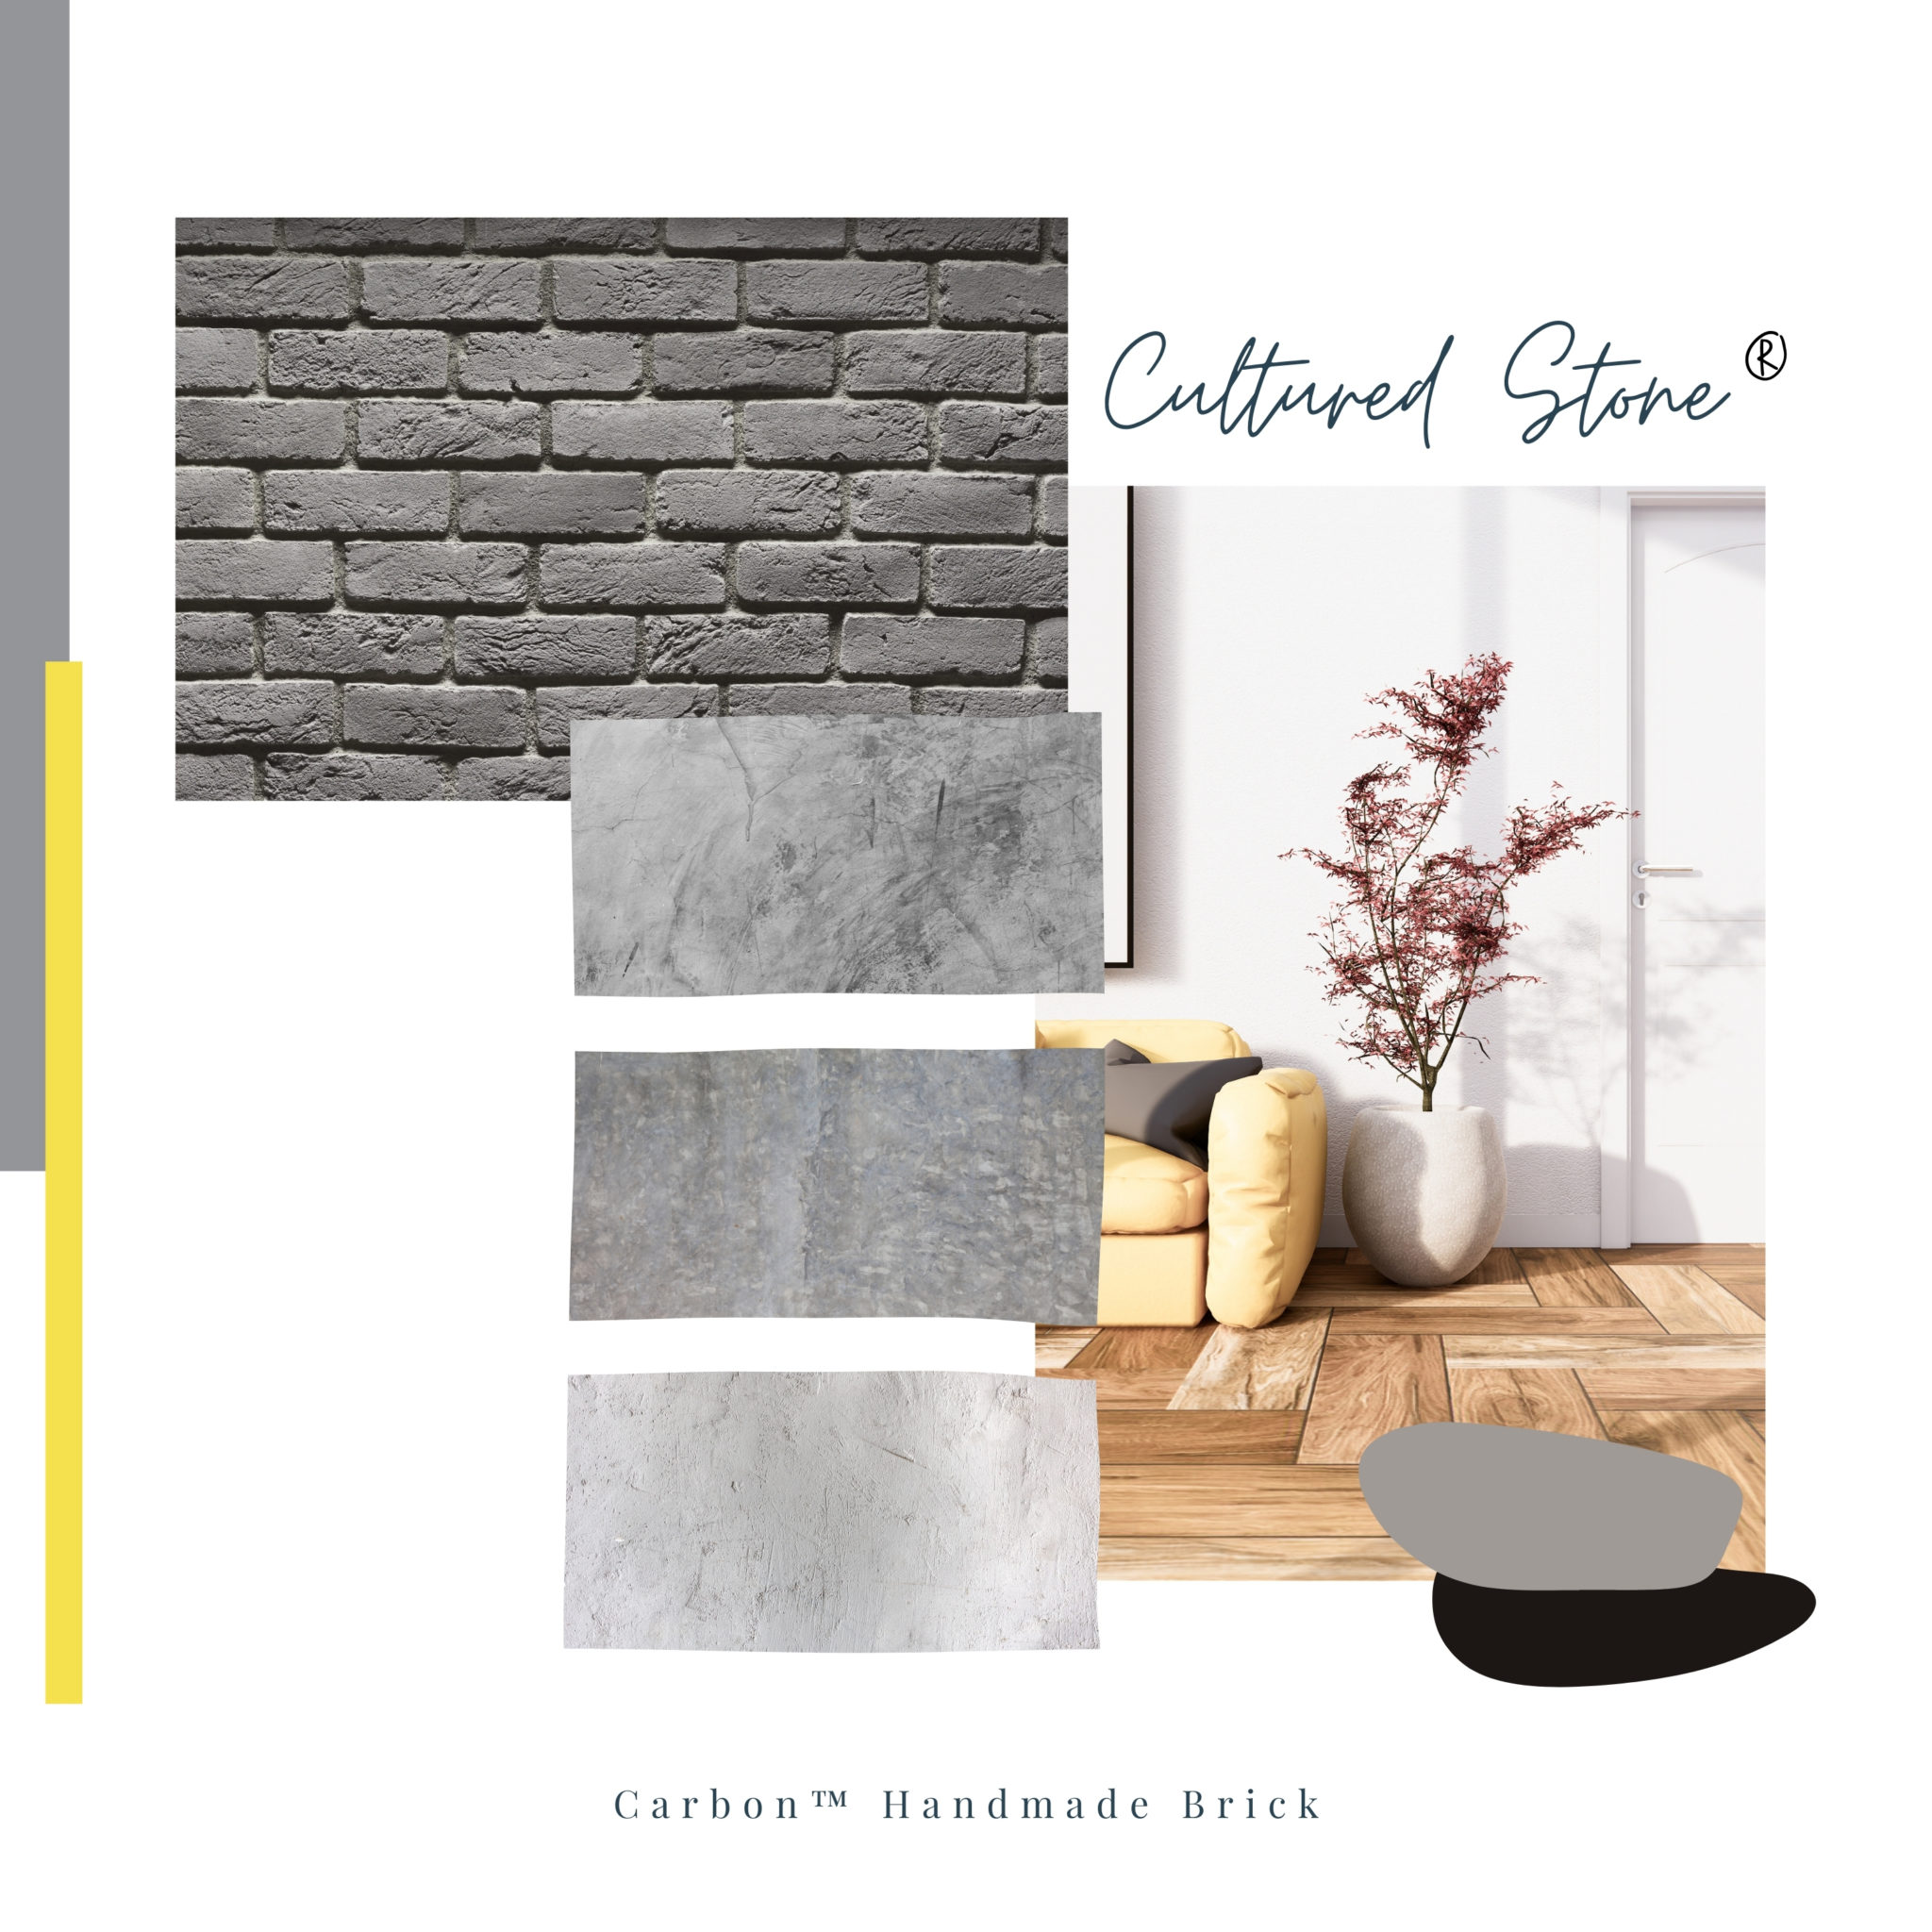 How to Pair 2021's Pantone Colors with our Stone Veneers - Cultured Stone®